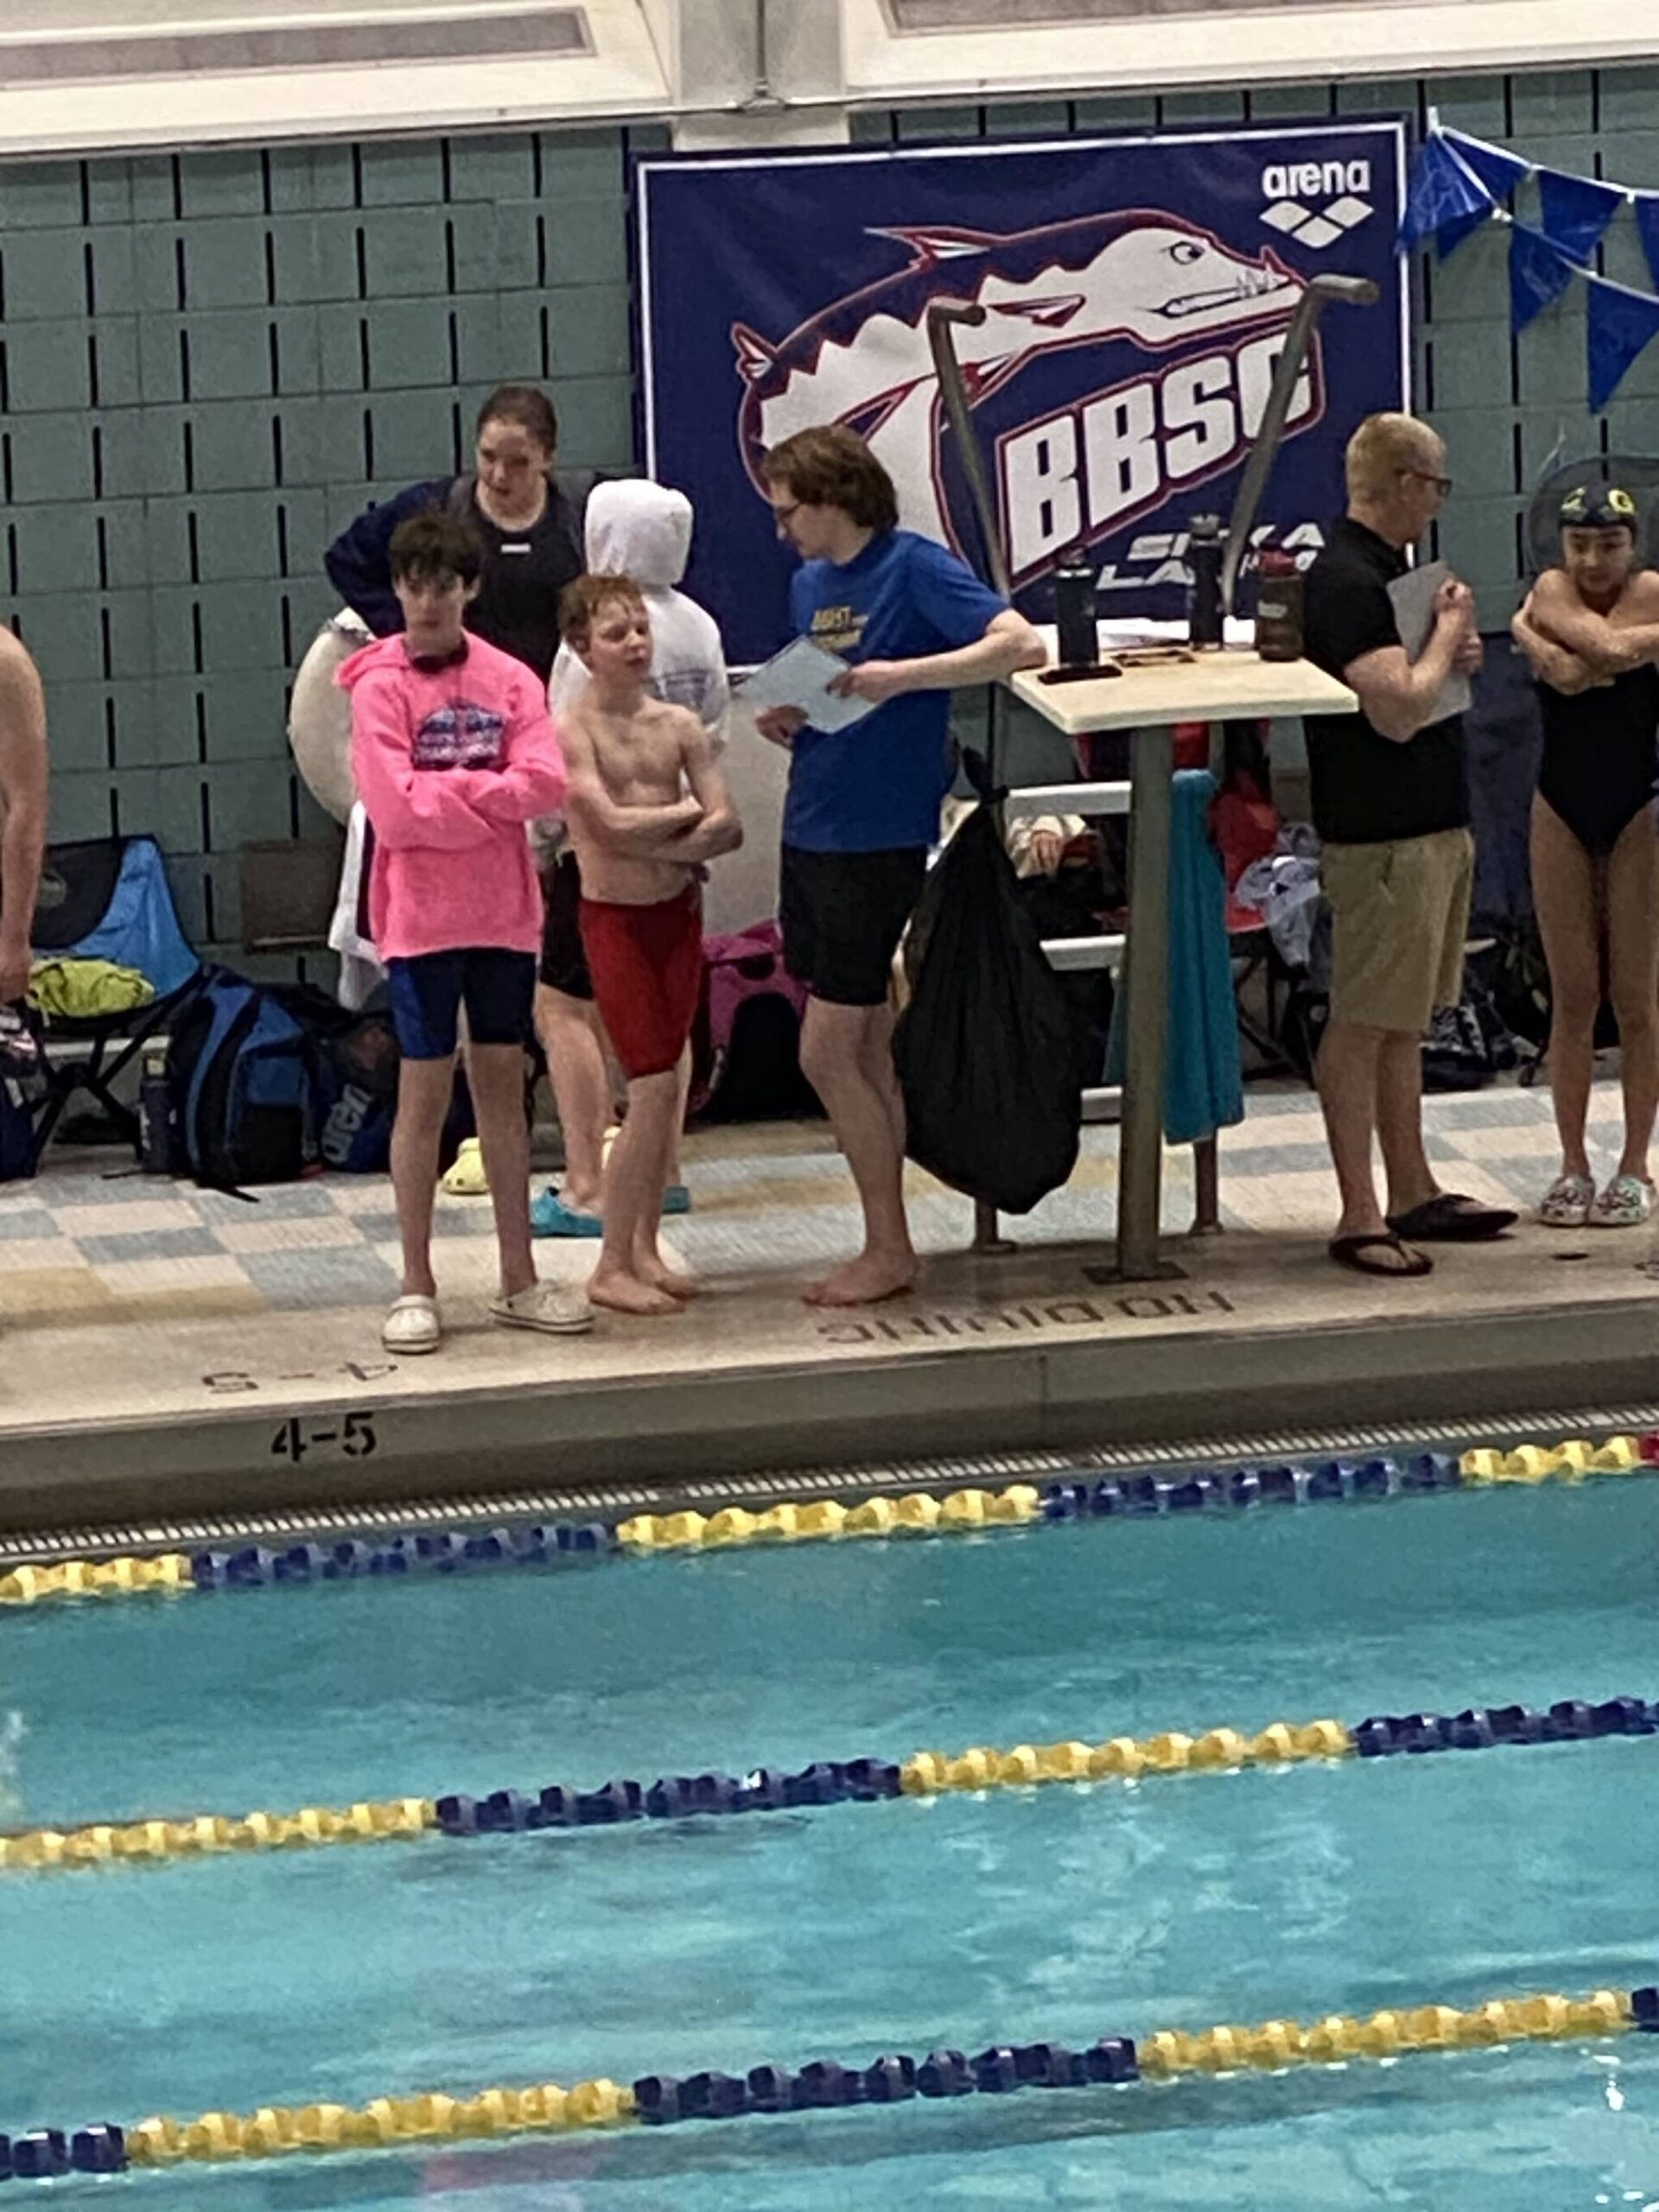 Andrew Sanders and Liam Kiessling speaking to Glacier Swim Club coach Josiah Loseby after a race at this year’s Alaska Swimming State Championship in Anchorage. (Courtesy Photo / Savona Kiessling)